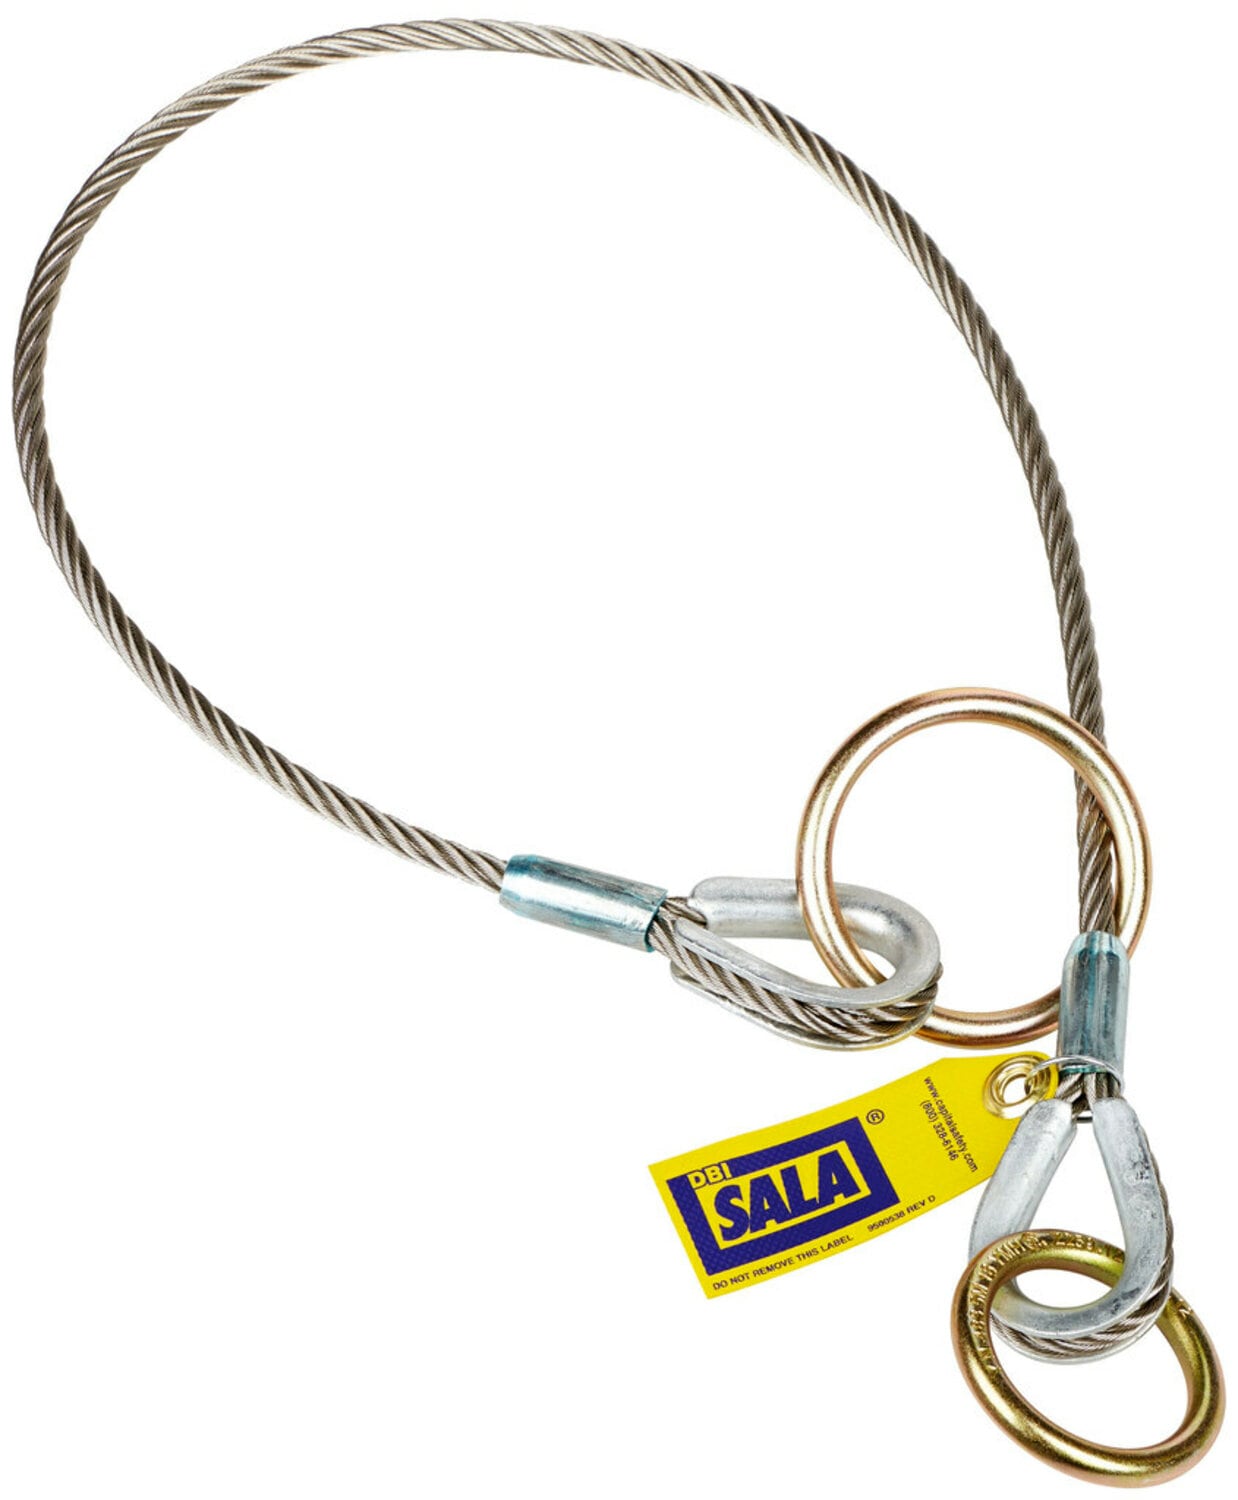 7012819626 - 3M DBI-SALA Pass-Thru Cable Tie-Off Adapter Anchor 5900565, Stainless Steel, 20 ft